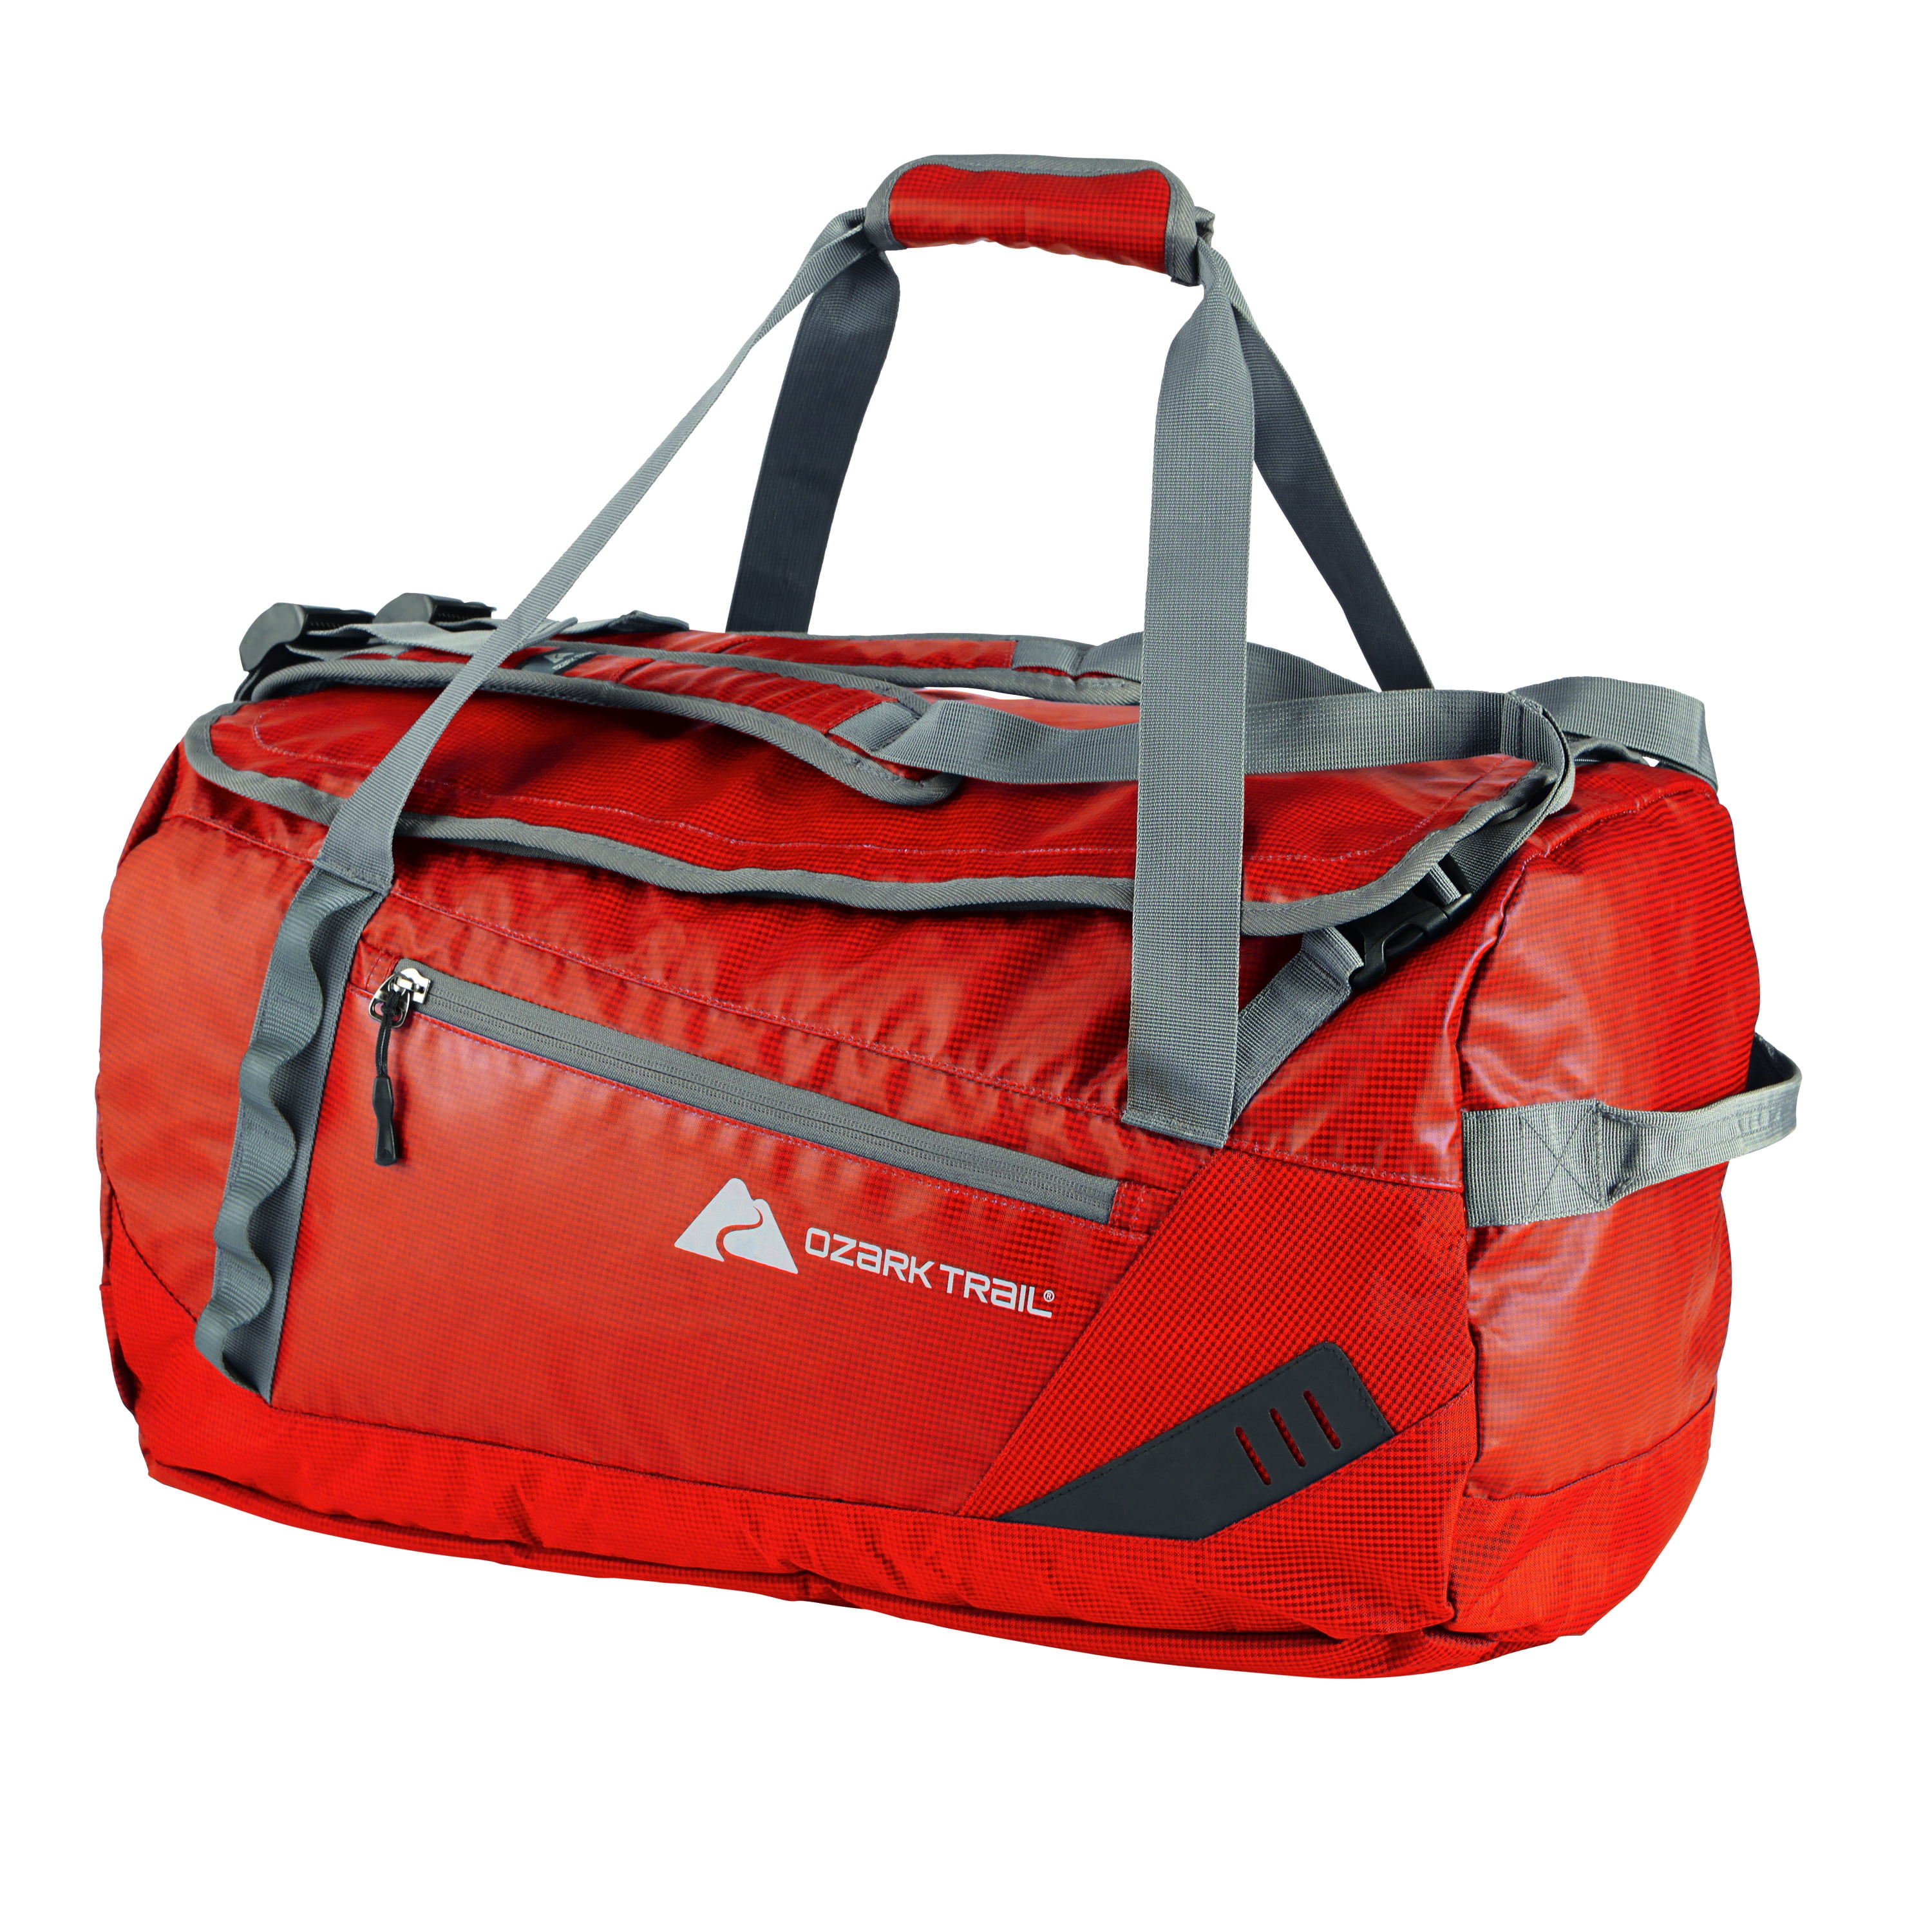 Ozark Trail 50L Duffel Bag with Backpack Straps, Unisex, Solid Red ...